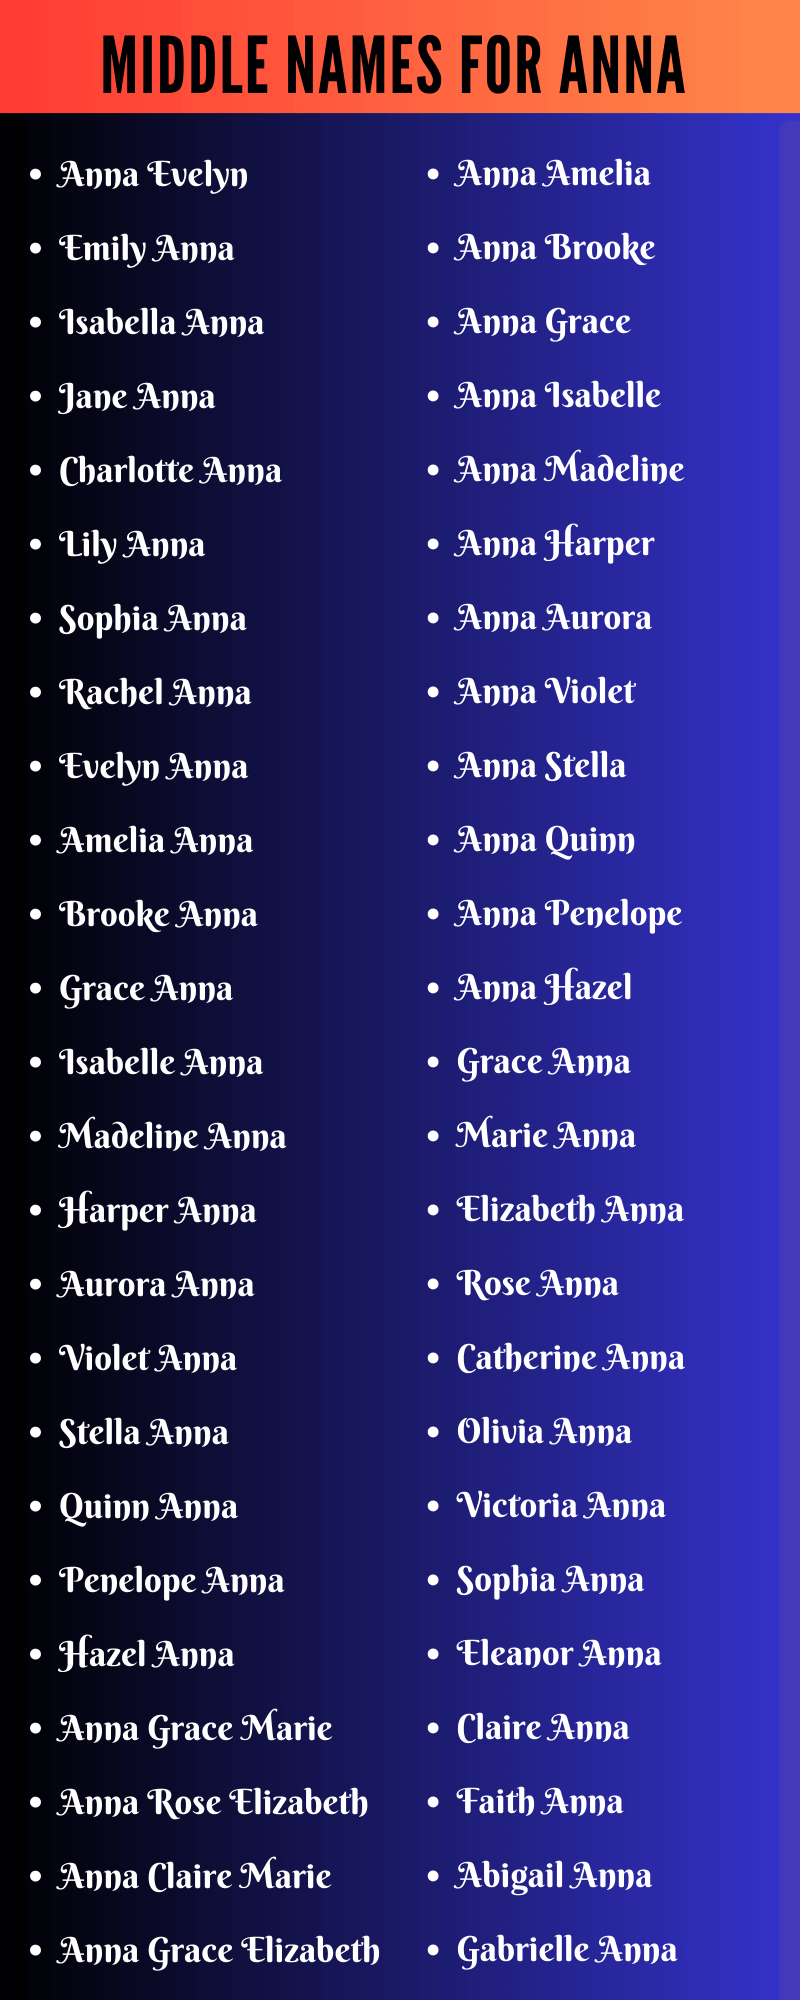 Middle Names For Anna